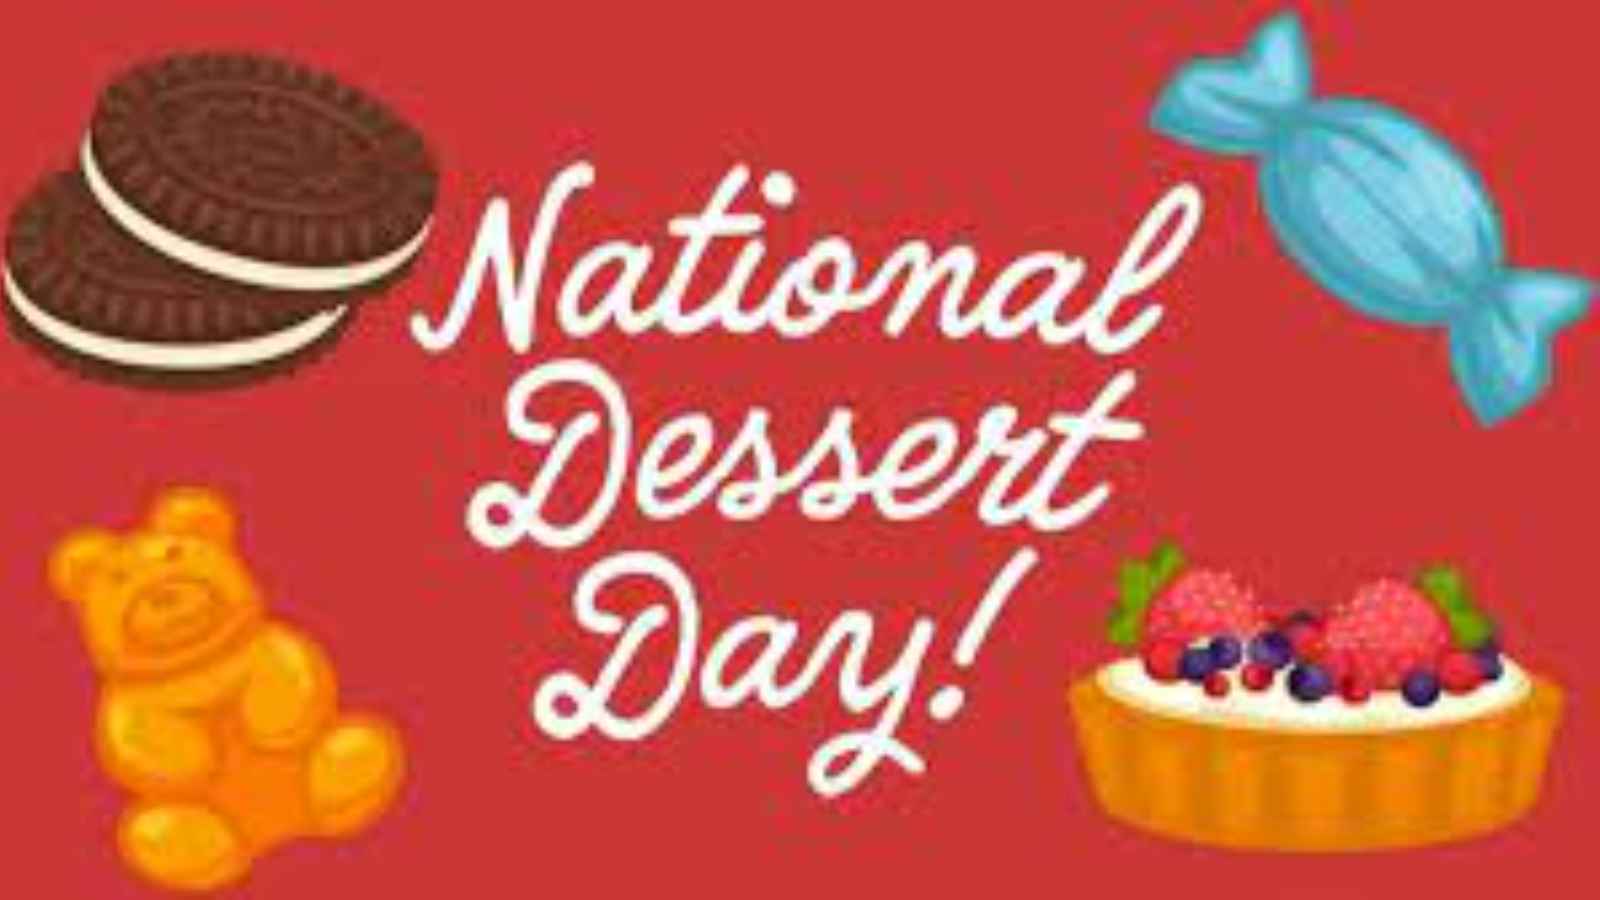 National Dessert Day 2022: Date, History and Different Types of Desserts